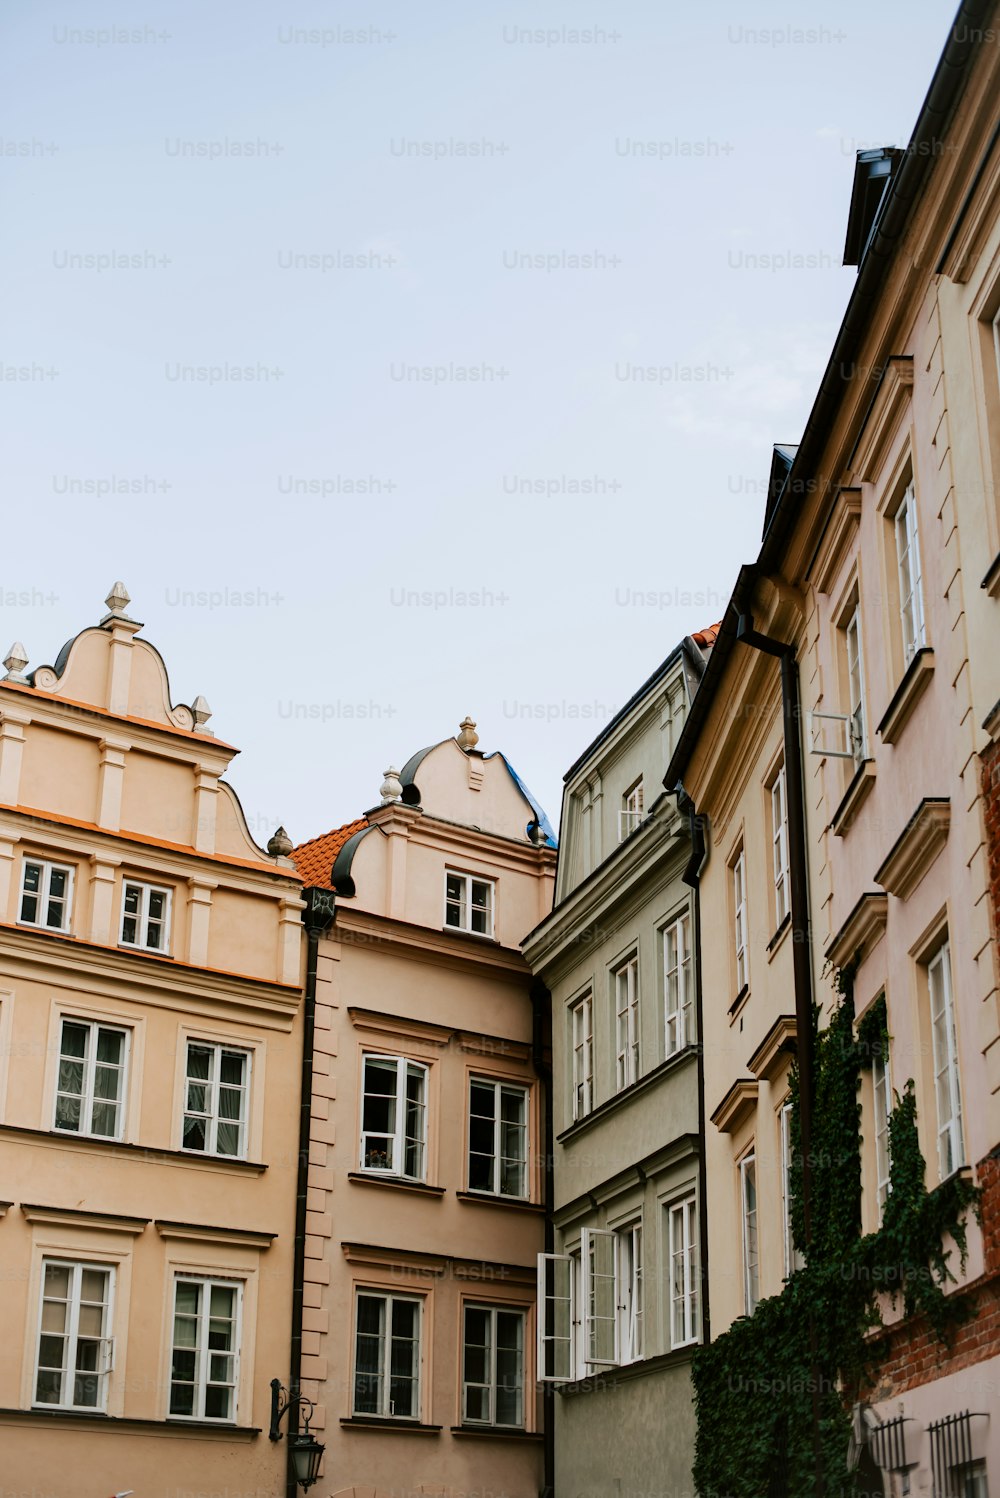 a row of buildings with a clock on the top of one of them